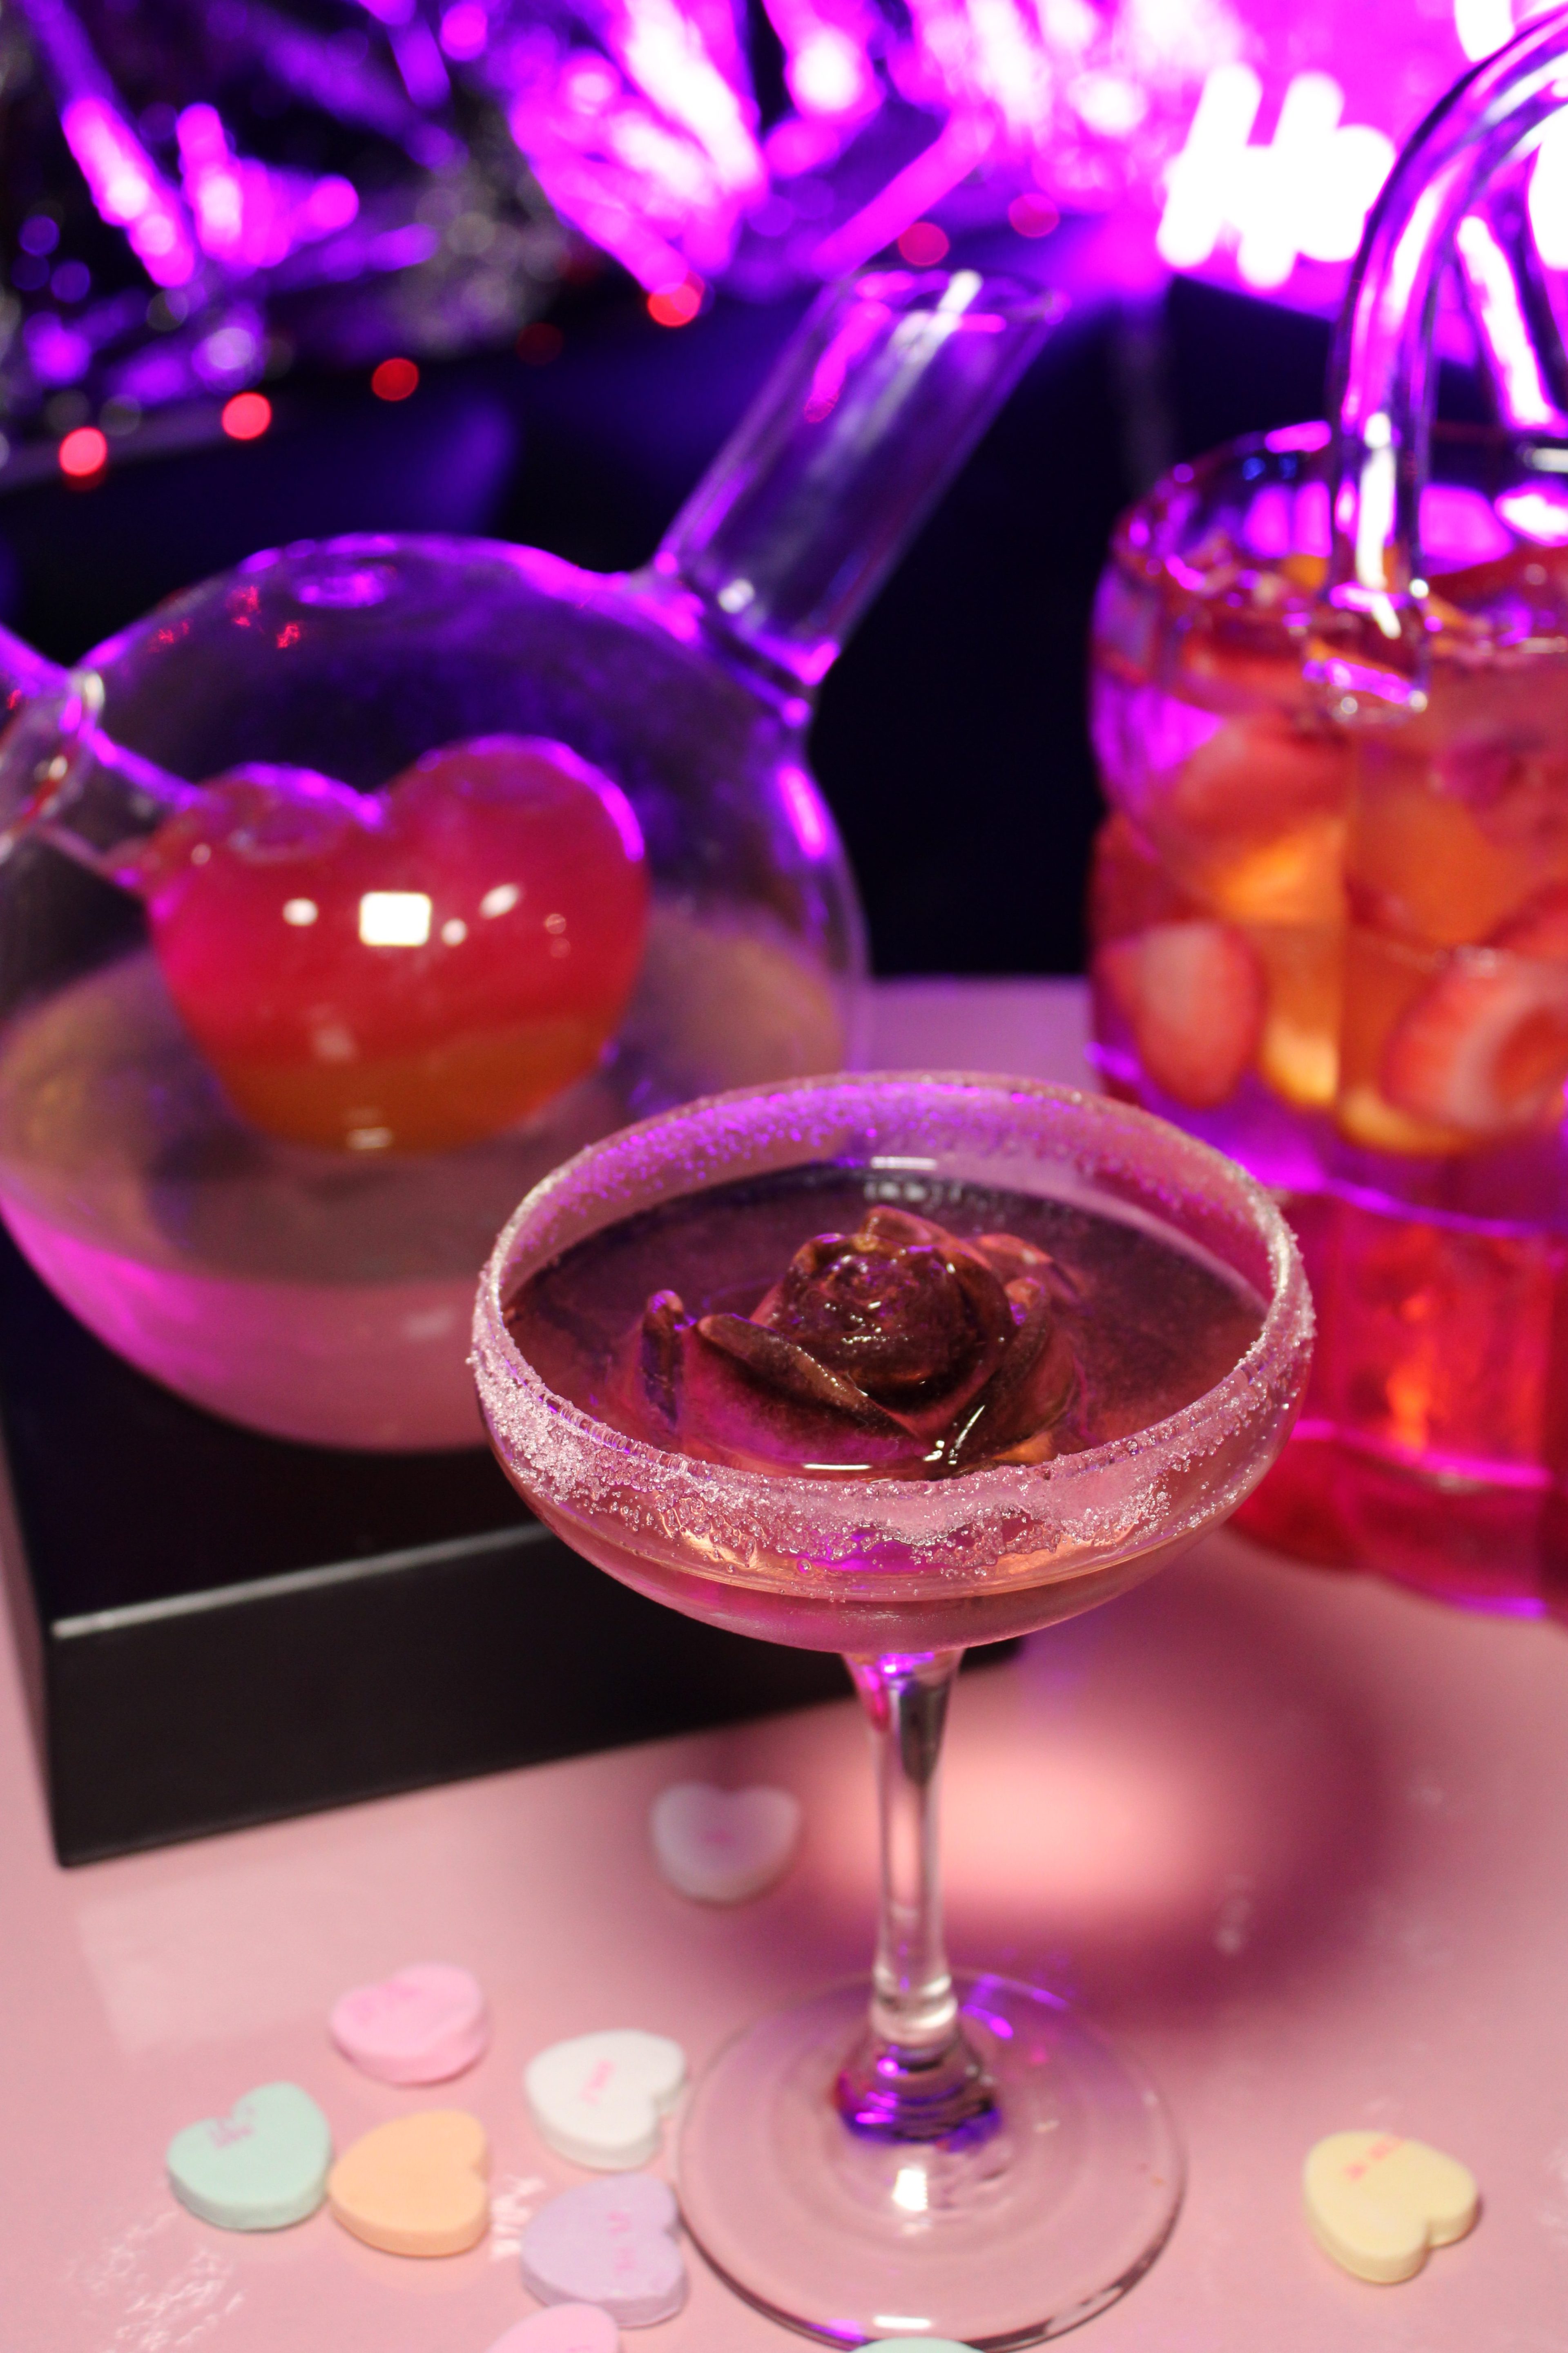 A red rose ice cub sits in a cocktail glass with candy hearts strewn below it.